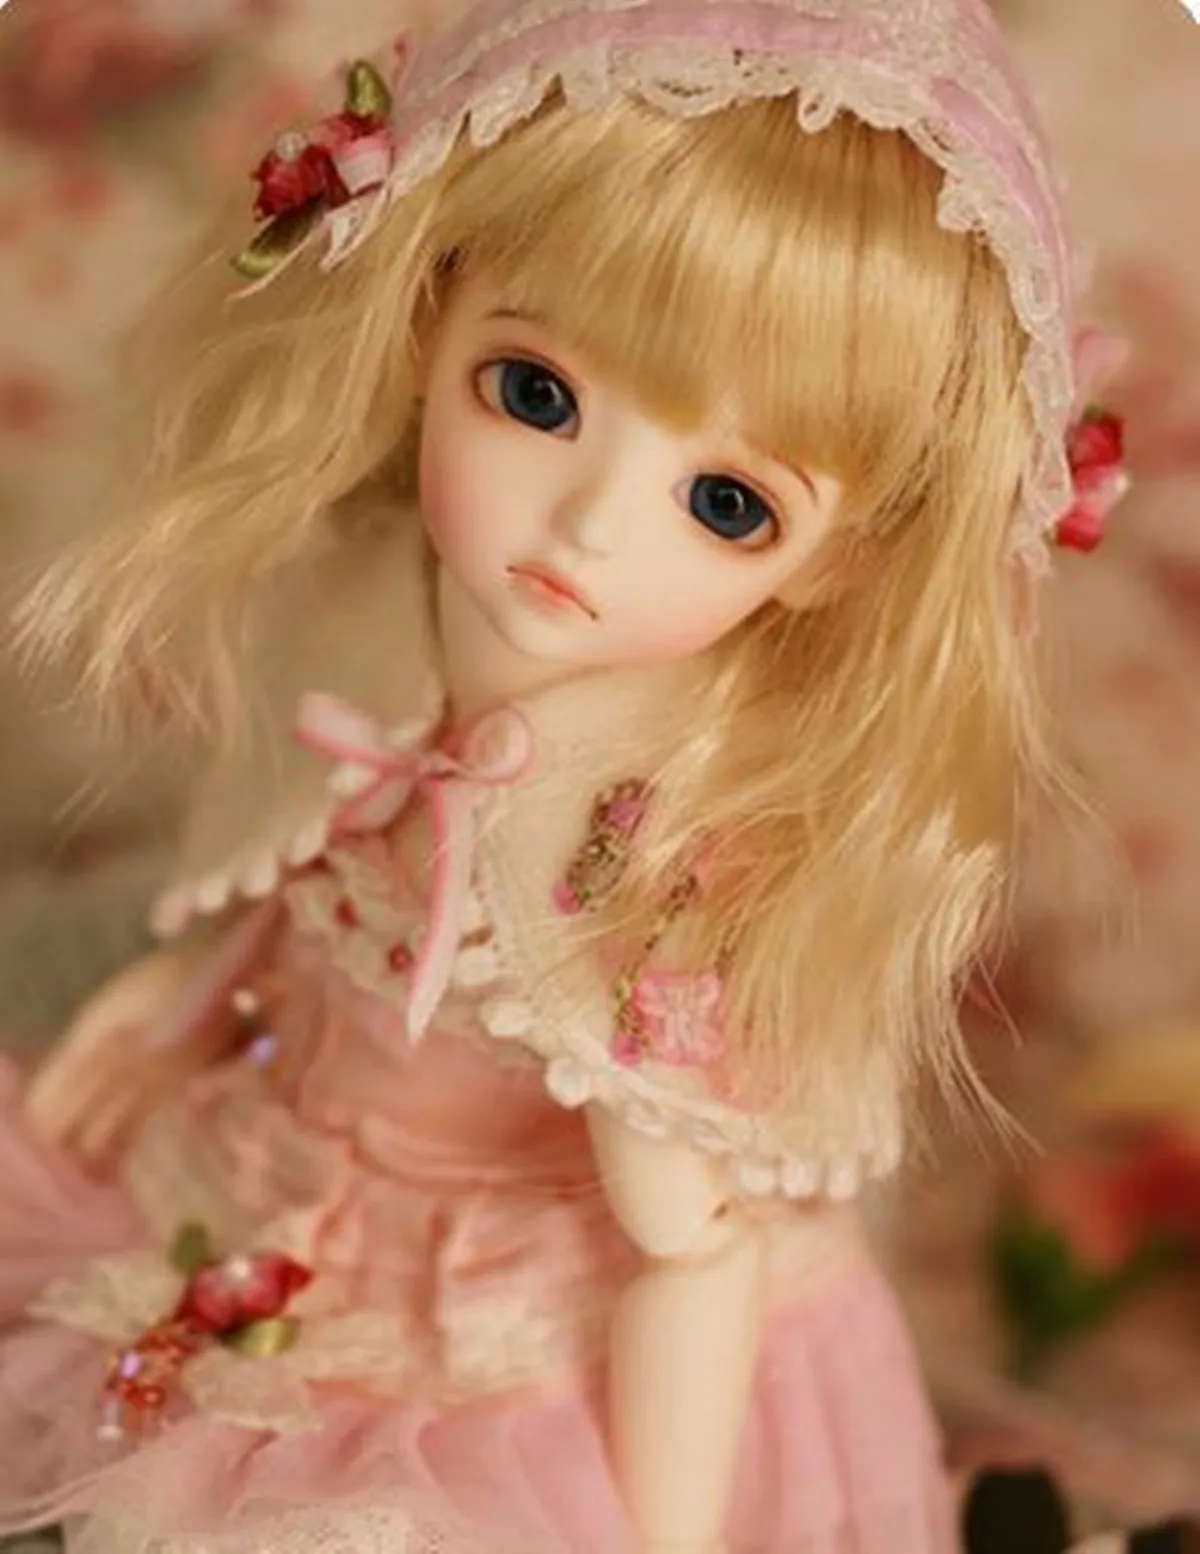 New 27cm bjd sd doll baby girl Hani 1/6 makeup fto send a full set of of clothes wig shoes spot